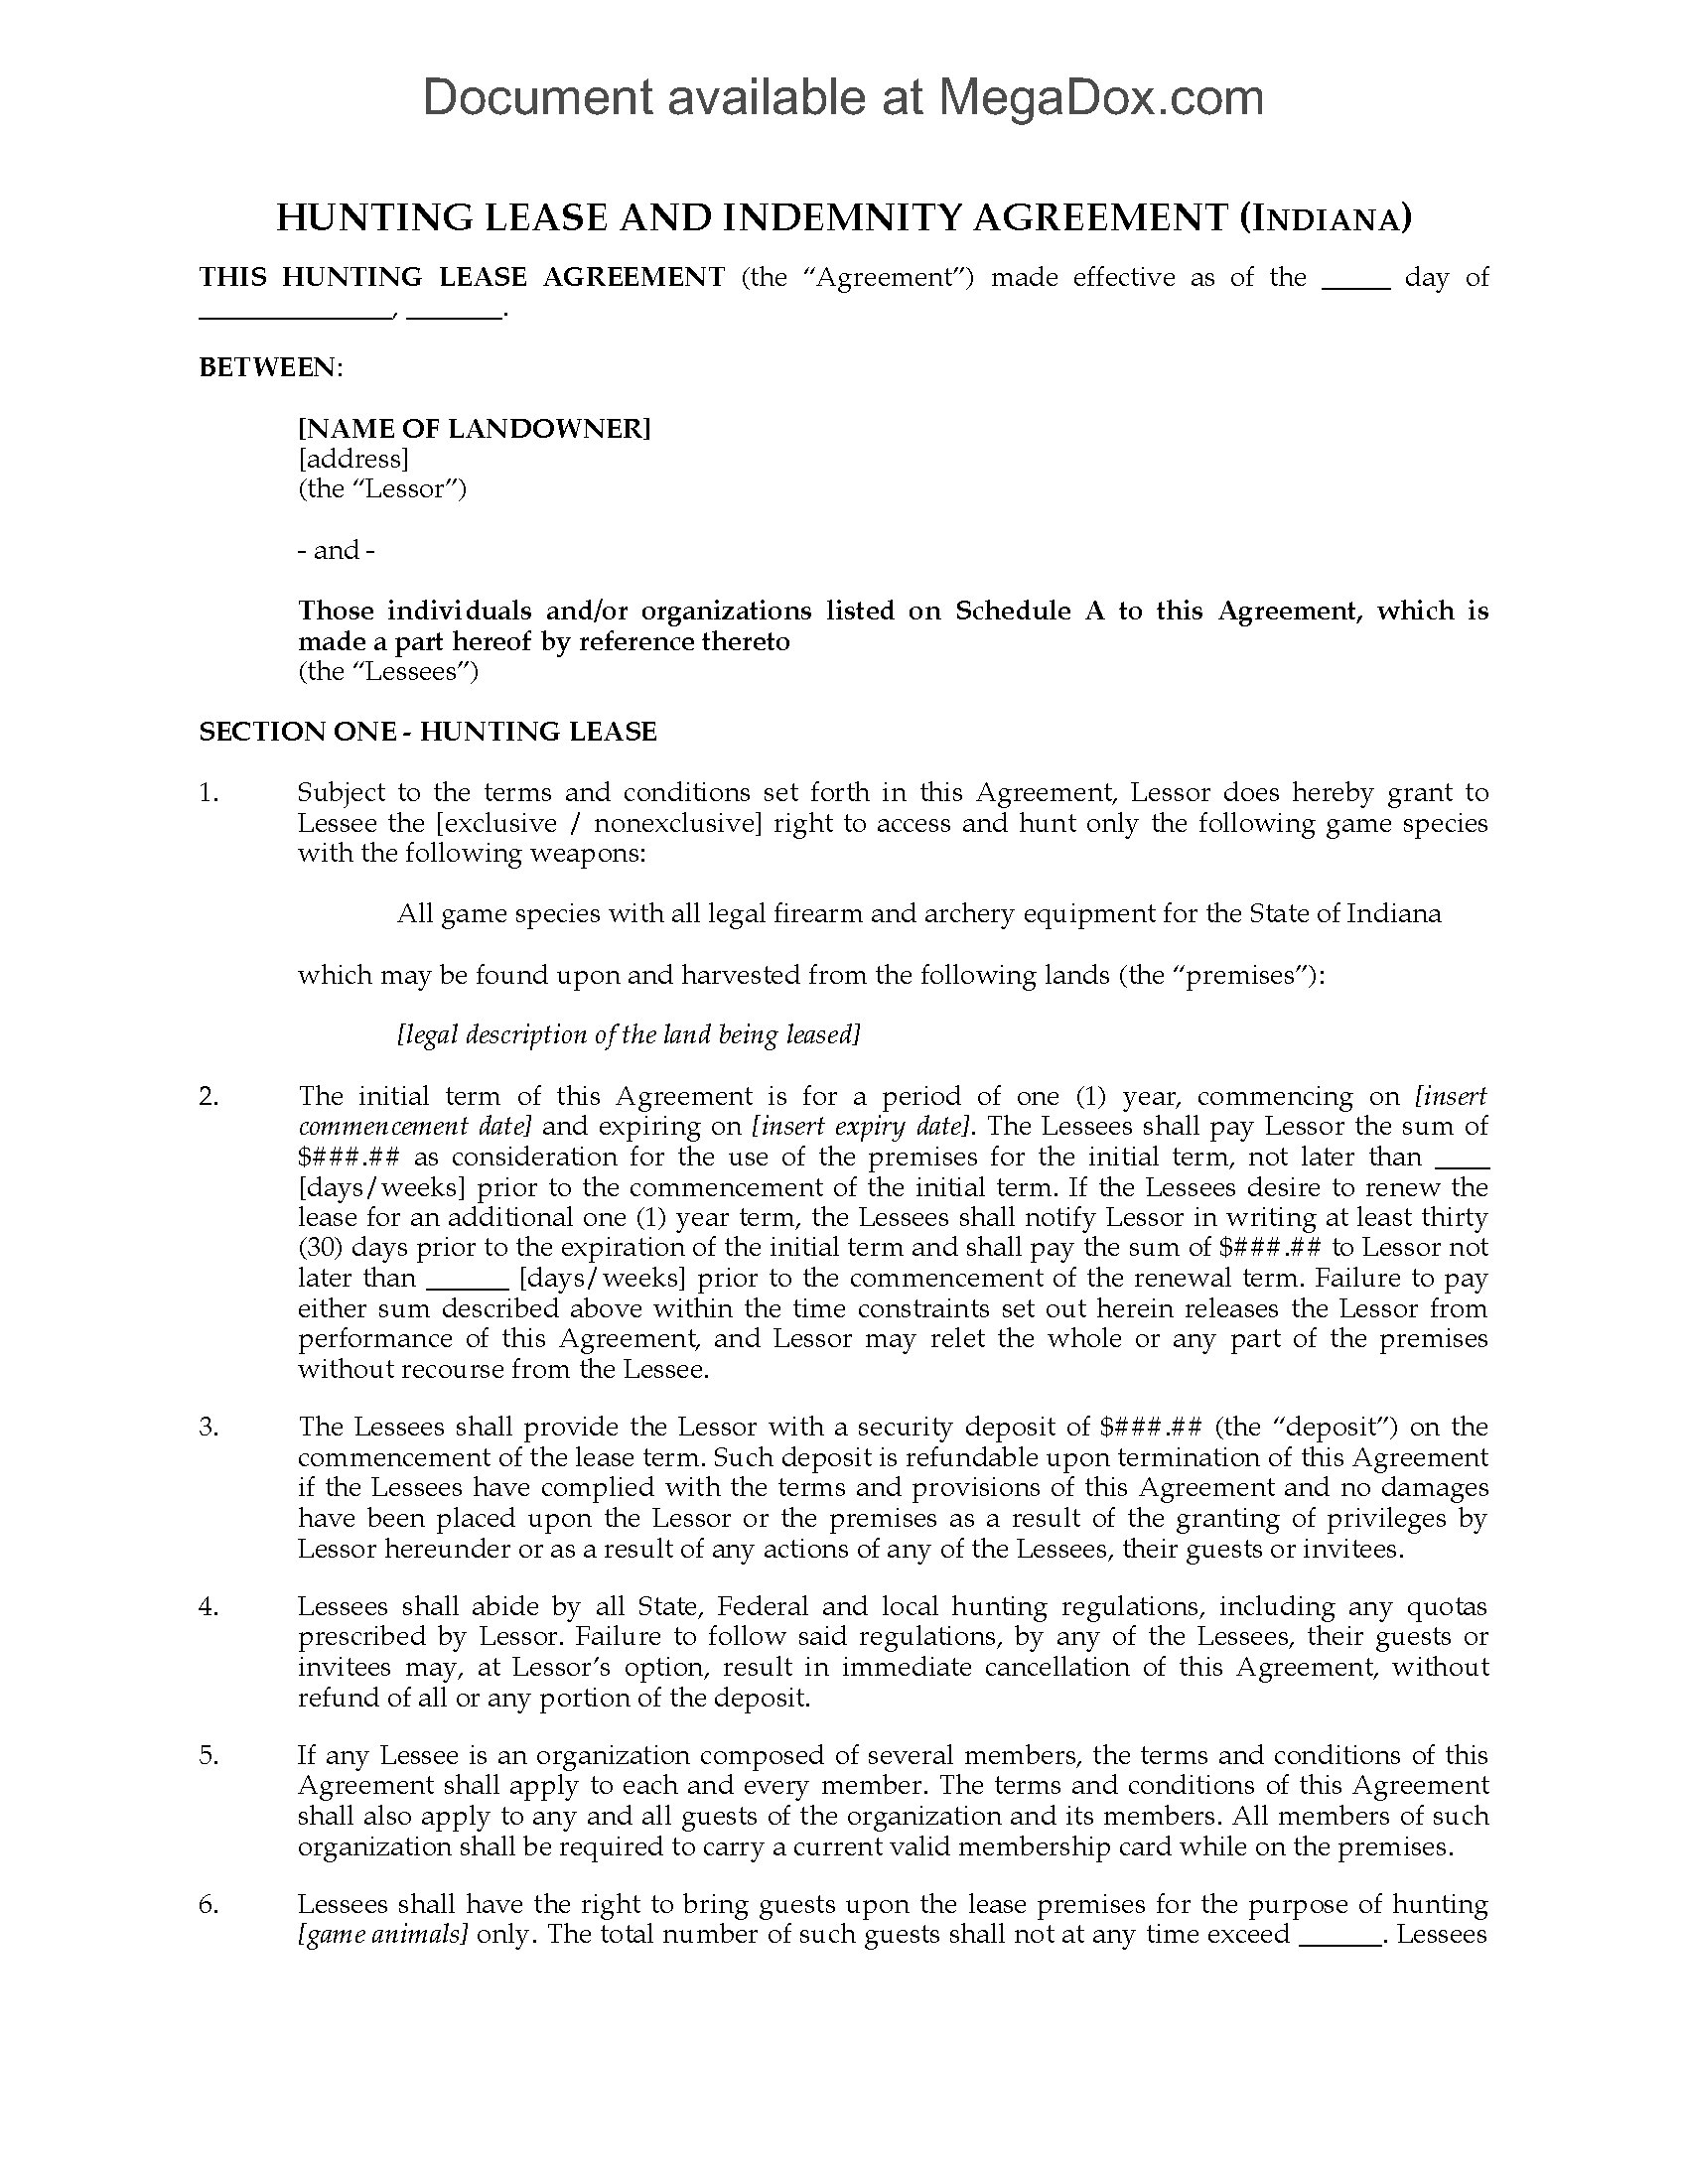 Indiana Hunting Lease Agreement Legal Forms and Business Templates